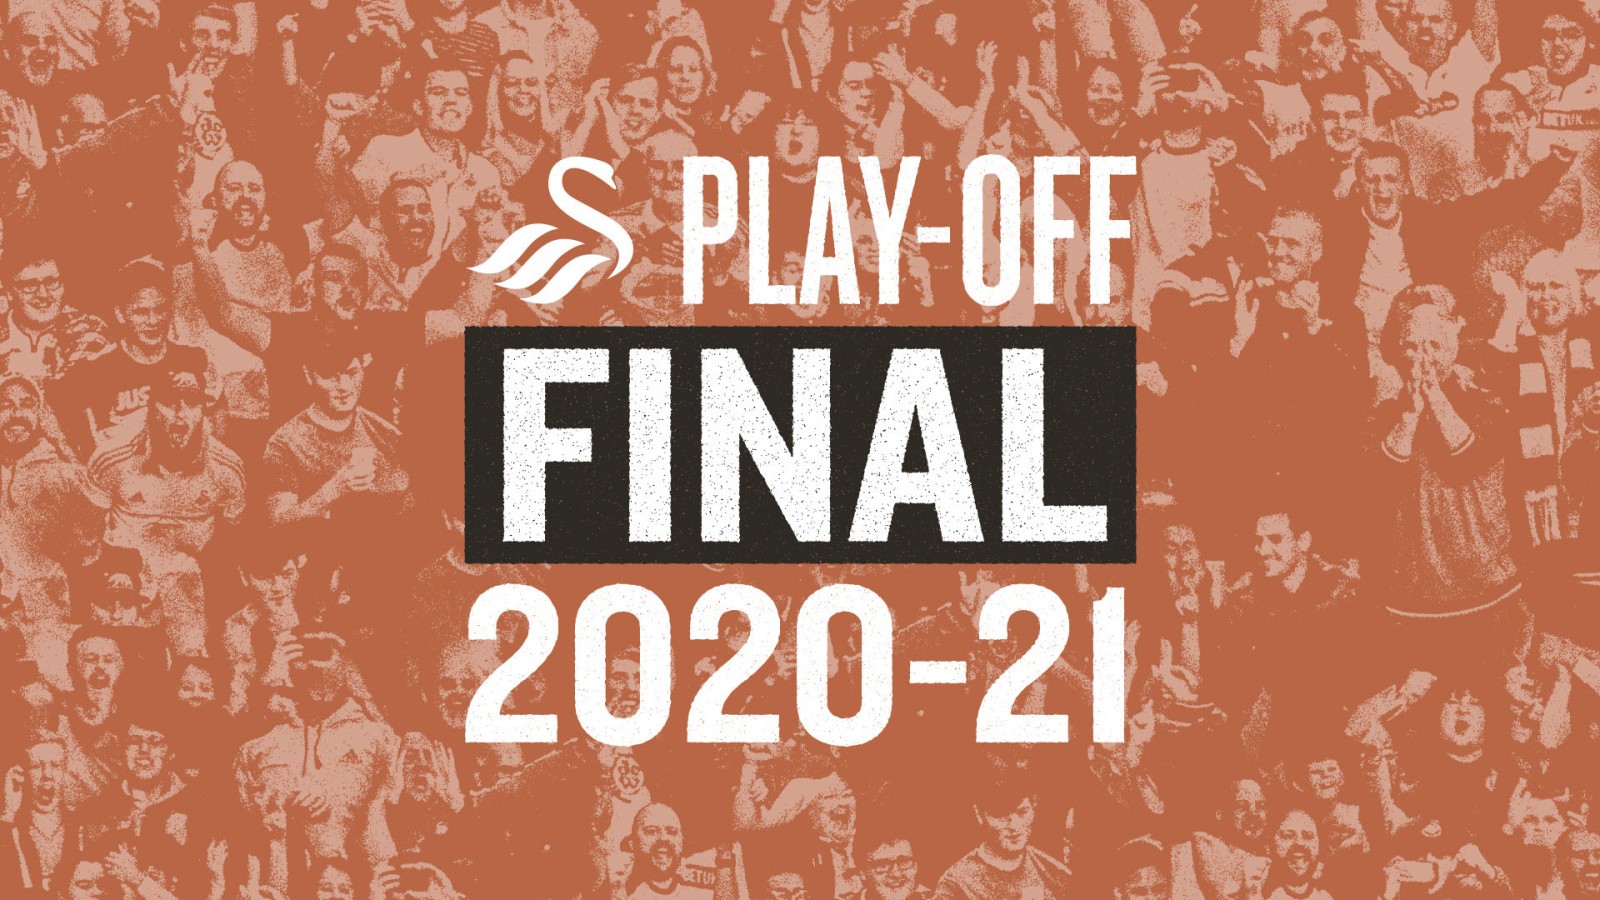 Ticket details for Championship playoff final Swansea